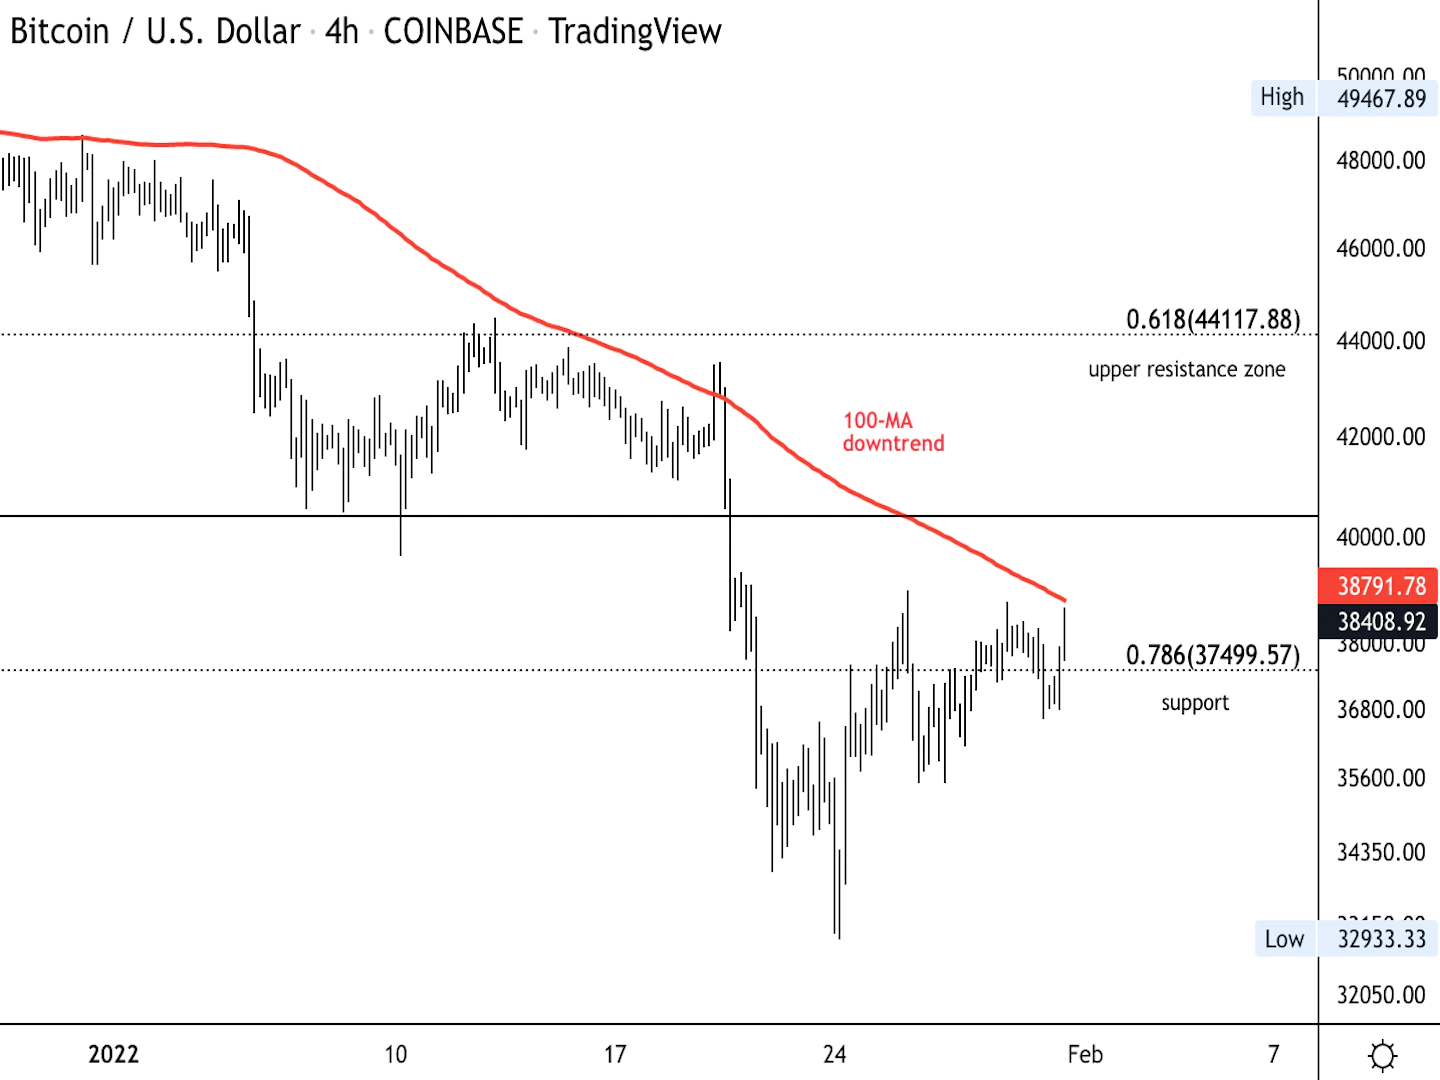 Bitcoin's four-hour price chart shows support/resistance levels. (Damanick Dantes, CryptoX)